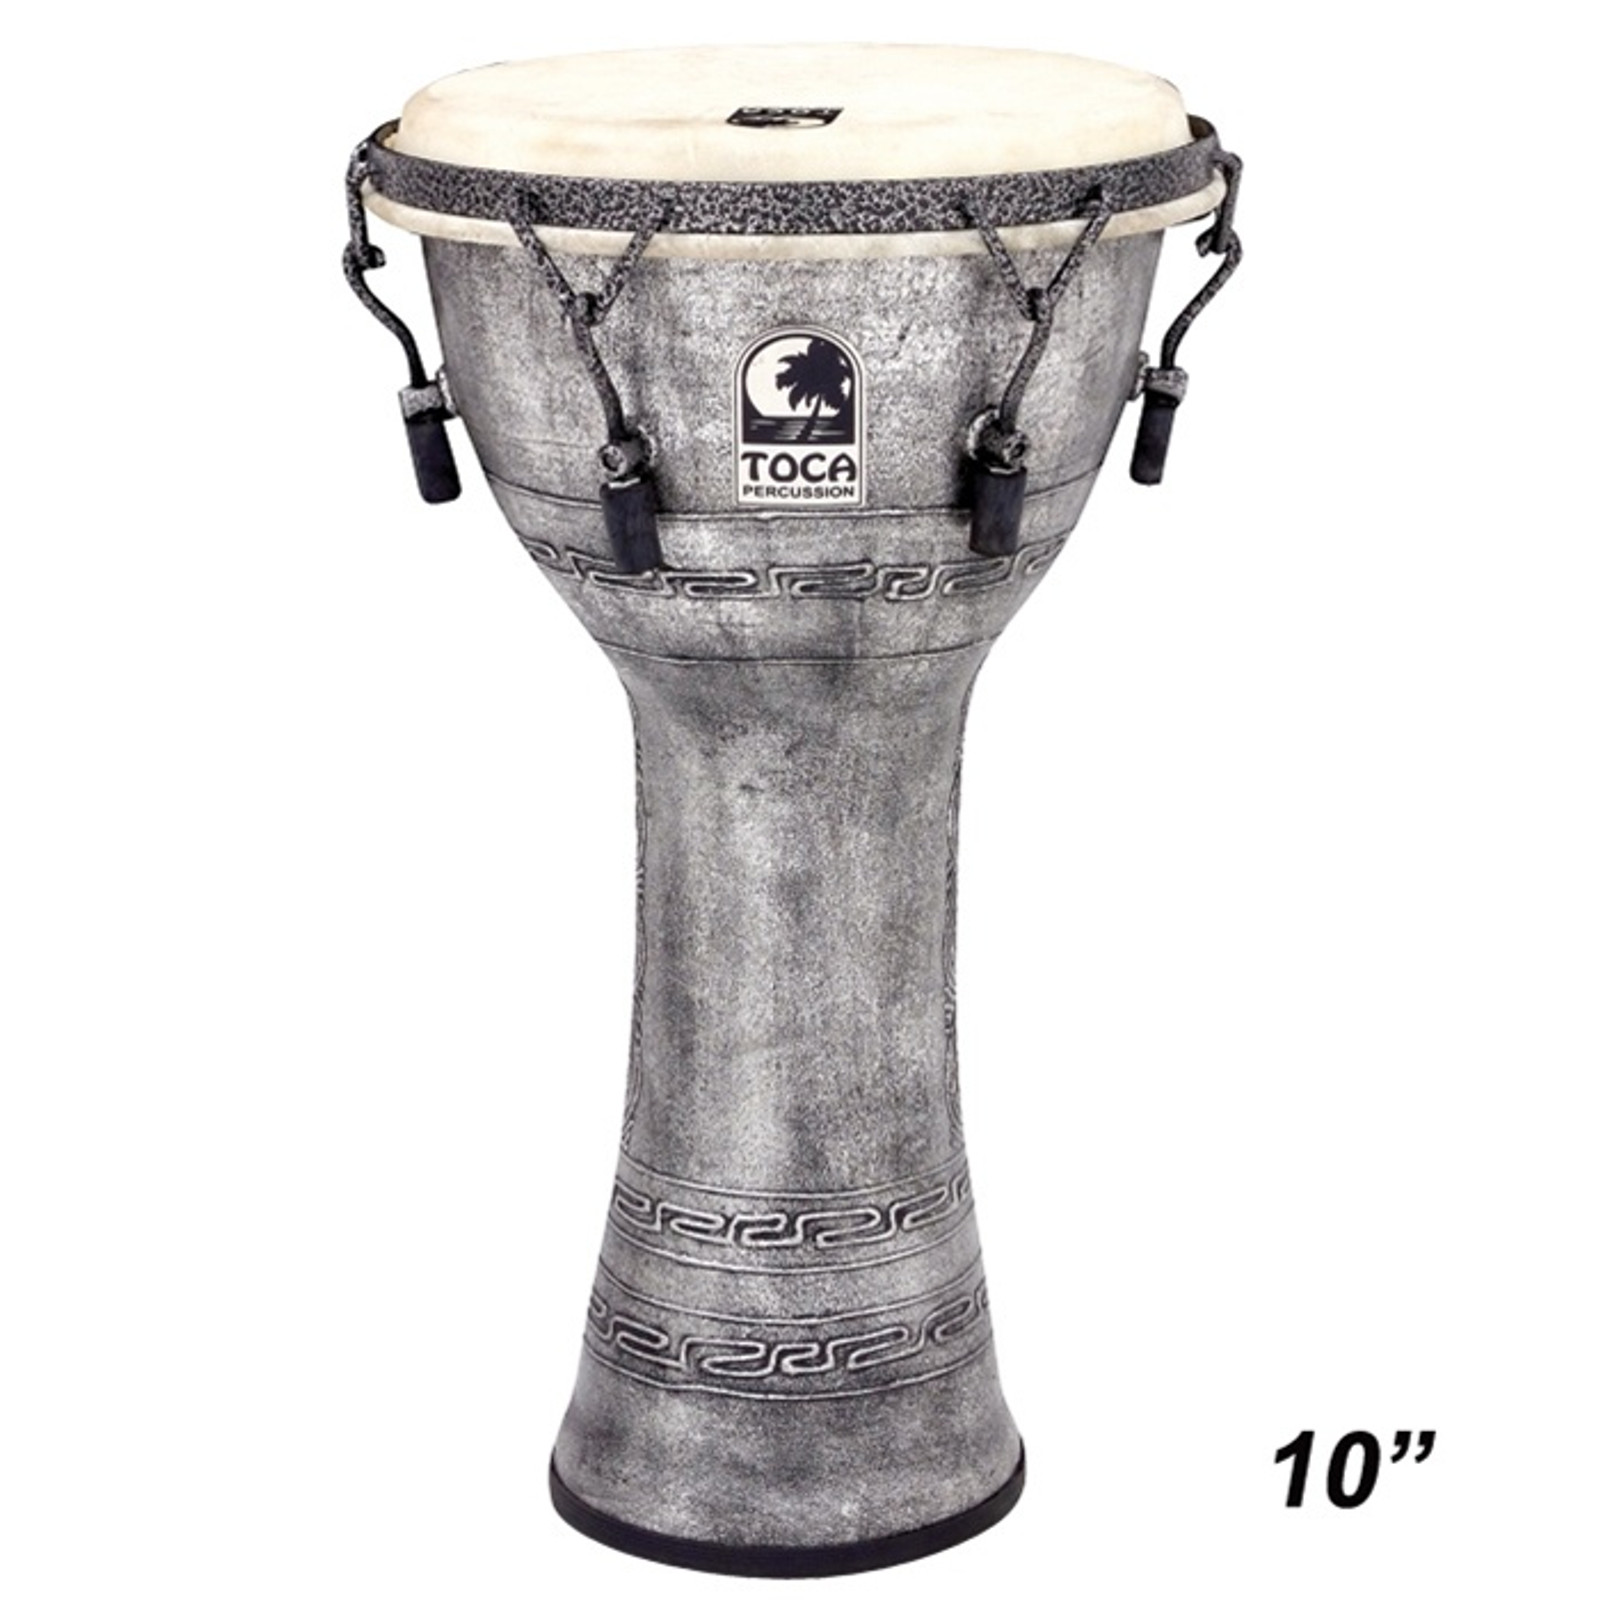 Toca Antique Silver Mechanically Tuned Djembe, 10" Head x 18" Tall